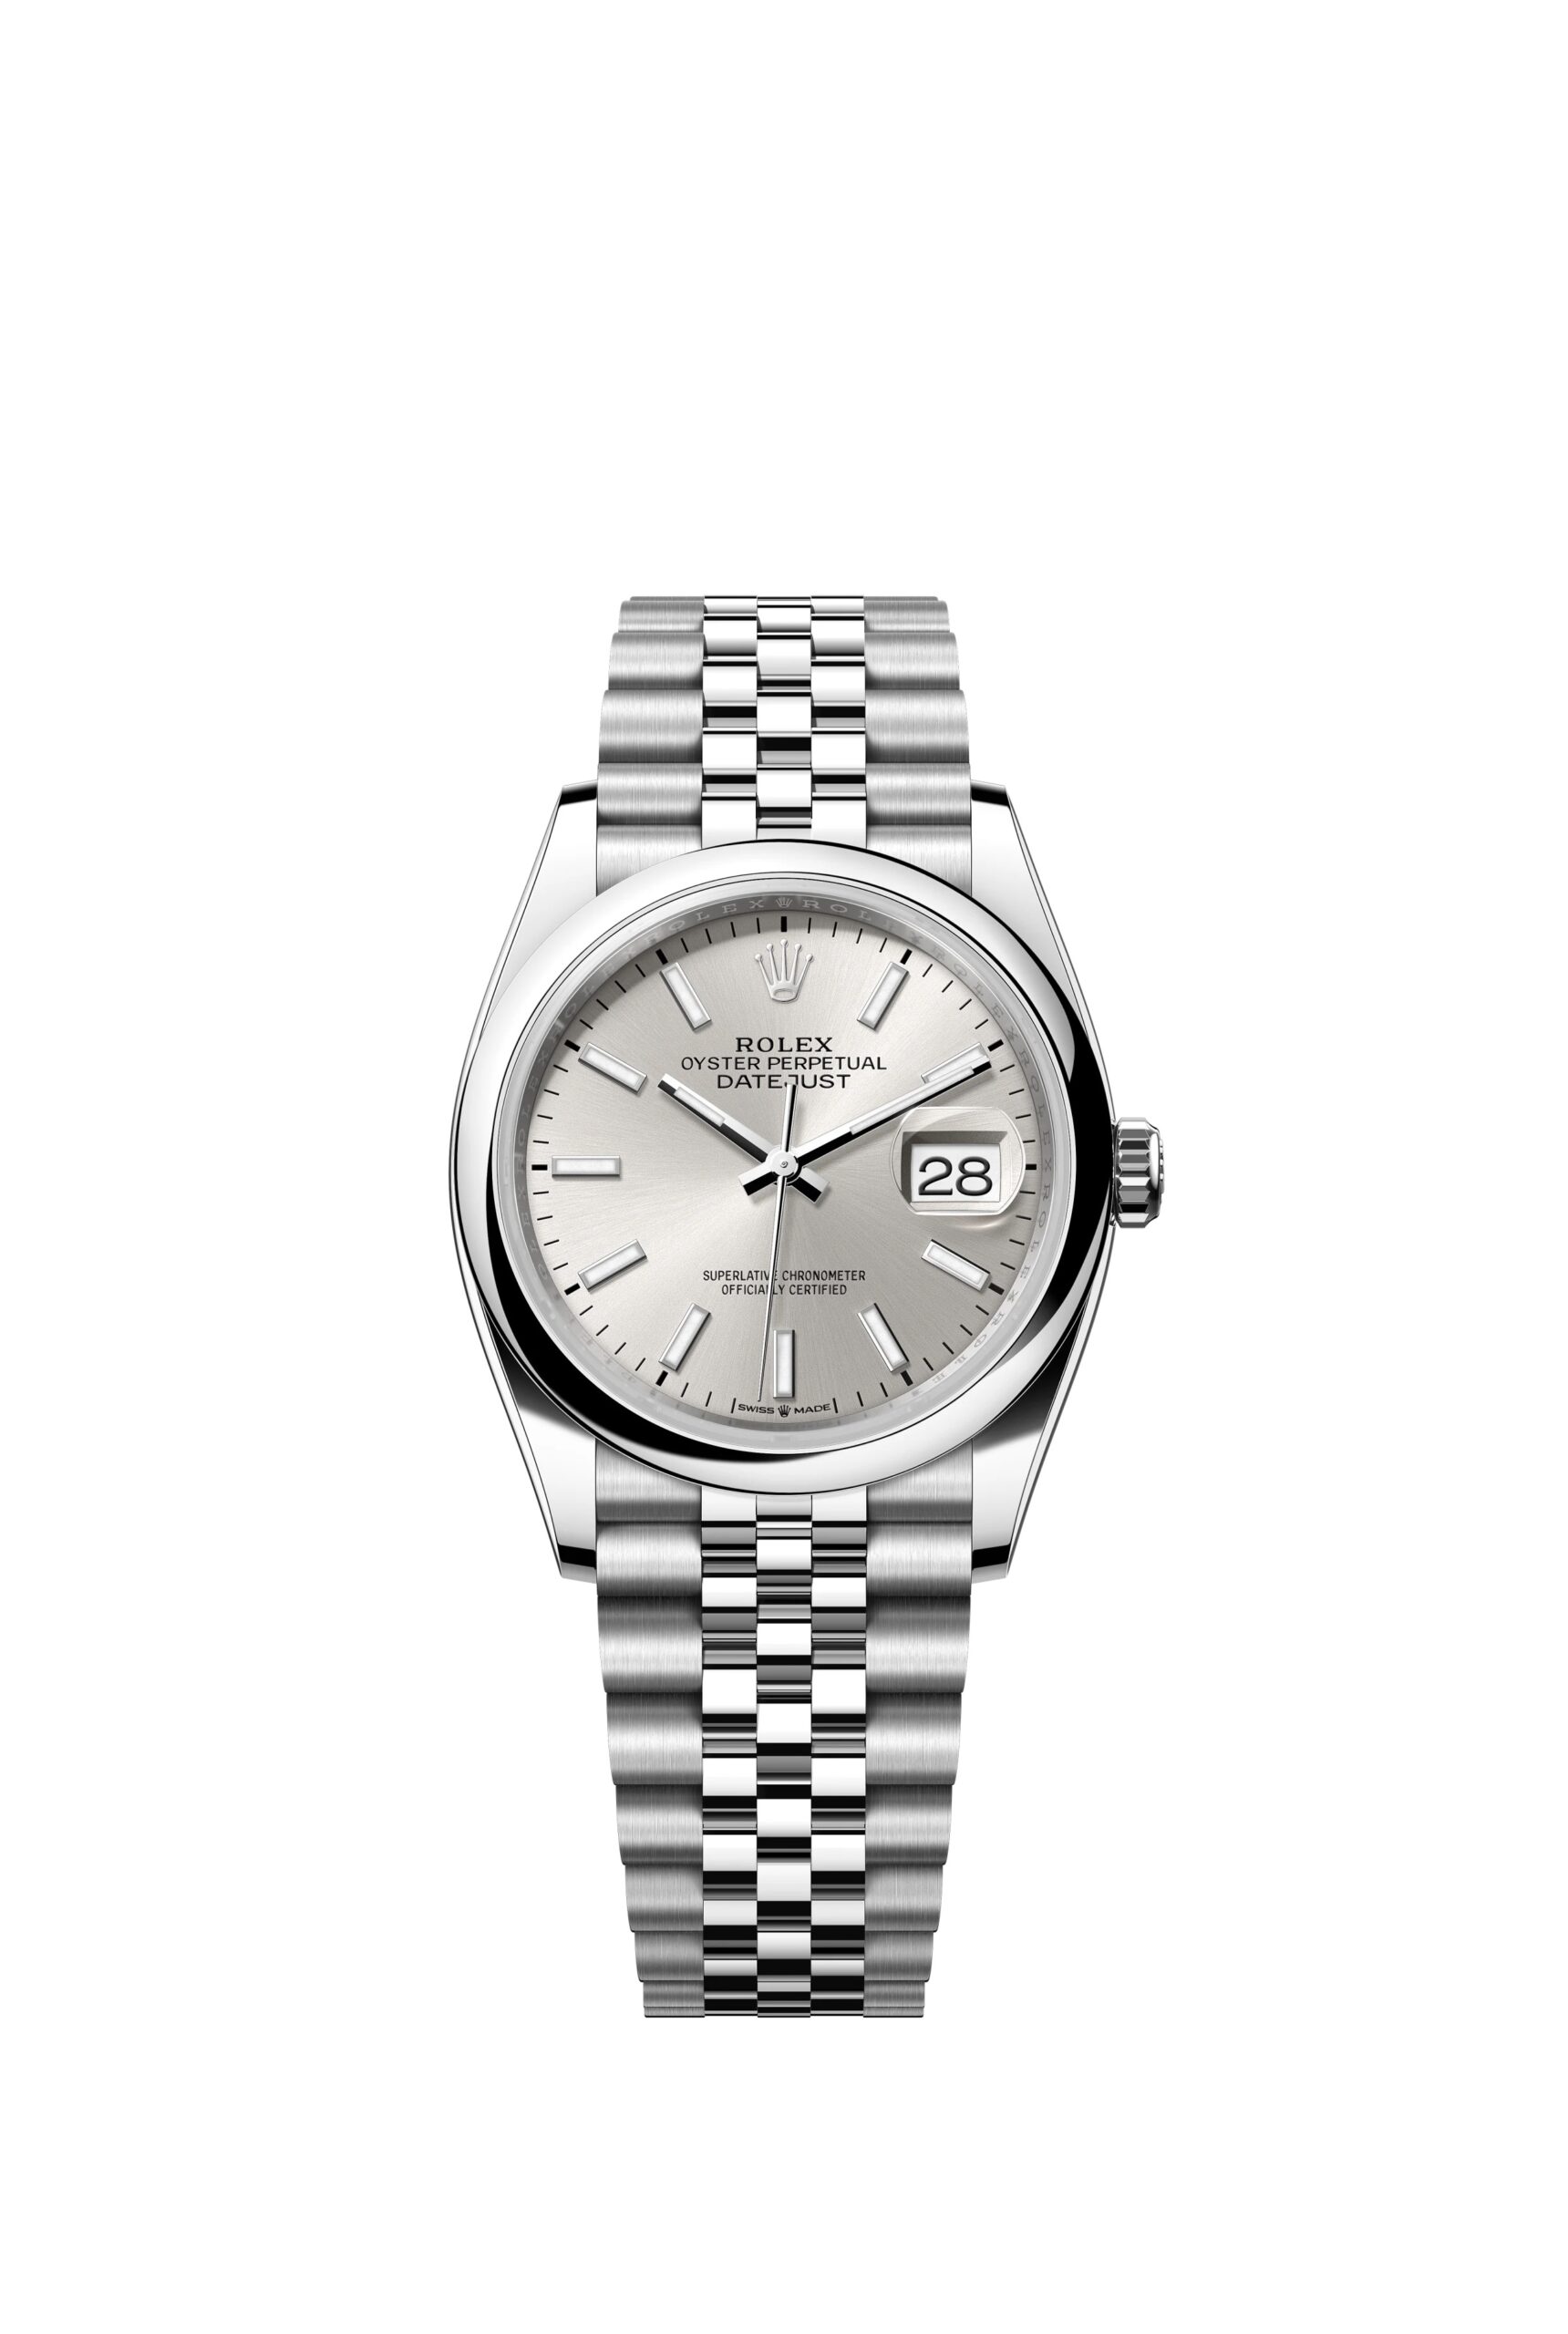 Rolex Datejust 36 Oyster, 36 mm, Oystersteel Reference 126200